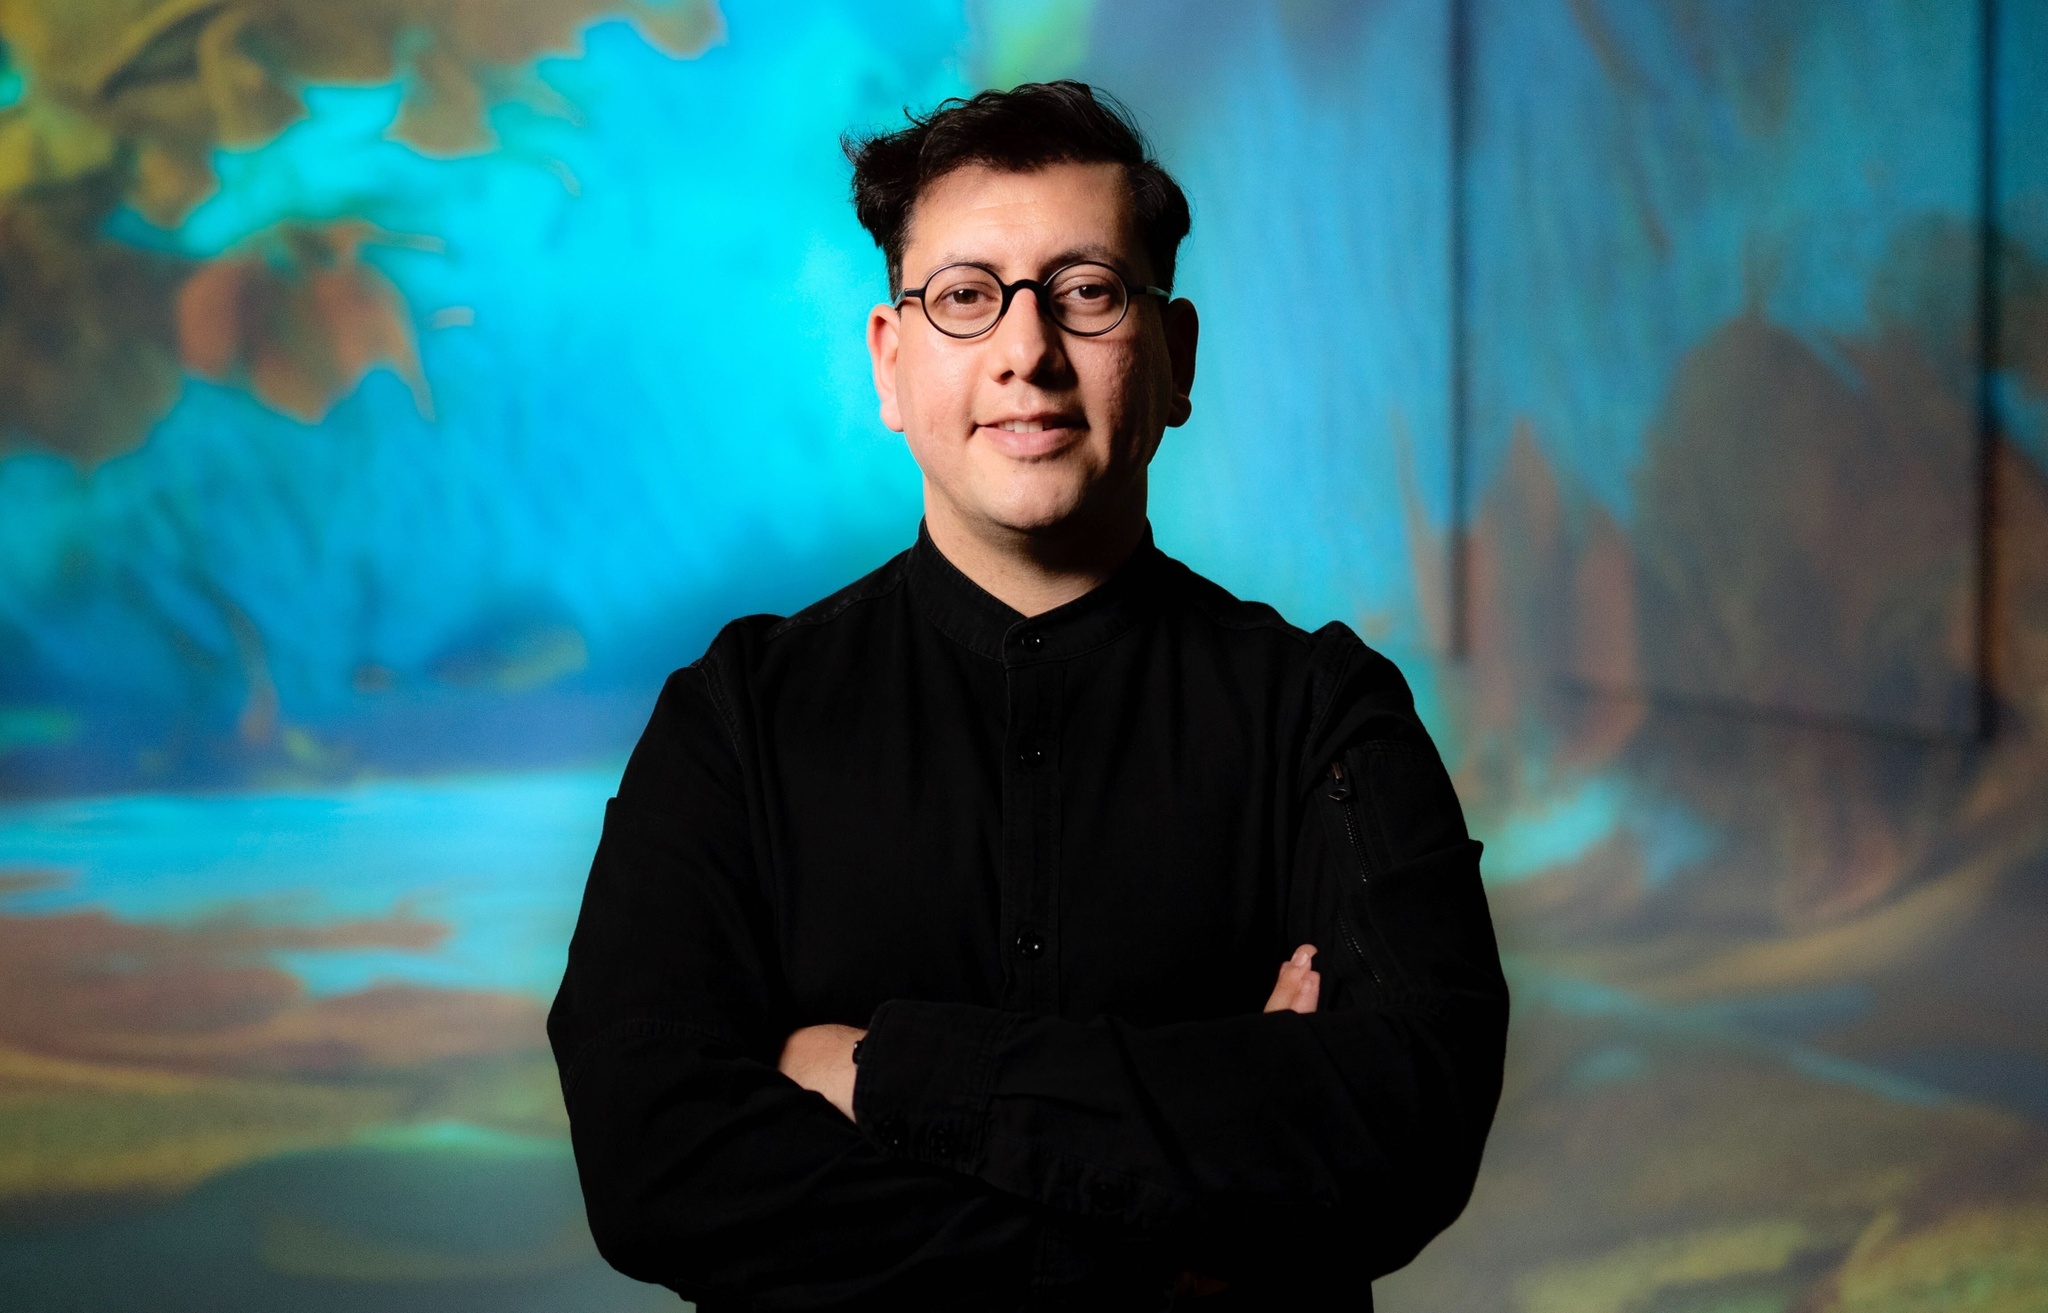 The artist Refik Anadol standing with arms crossed, wearing a black shirt and black-framed glasses, against a background with an abstract image recalling a forest or mountainous landscape 